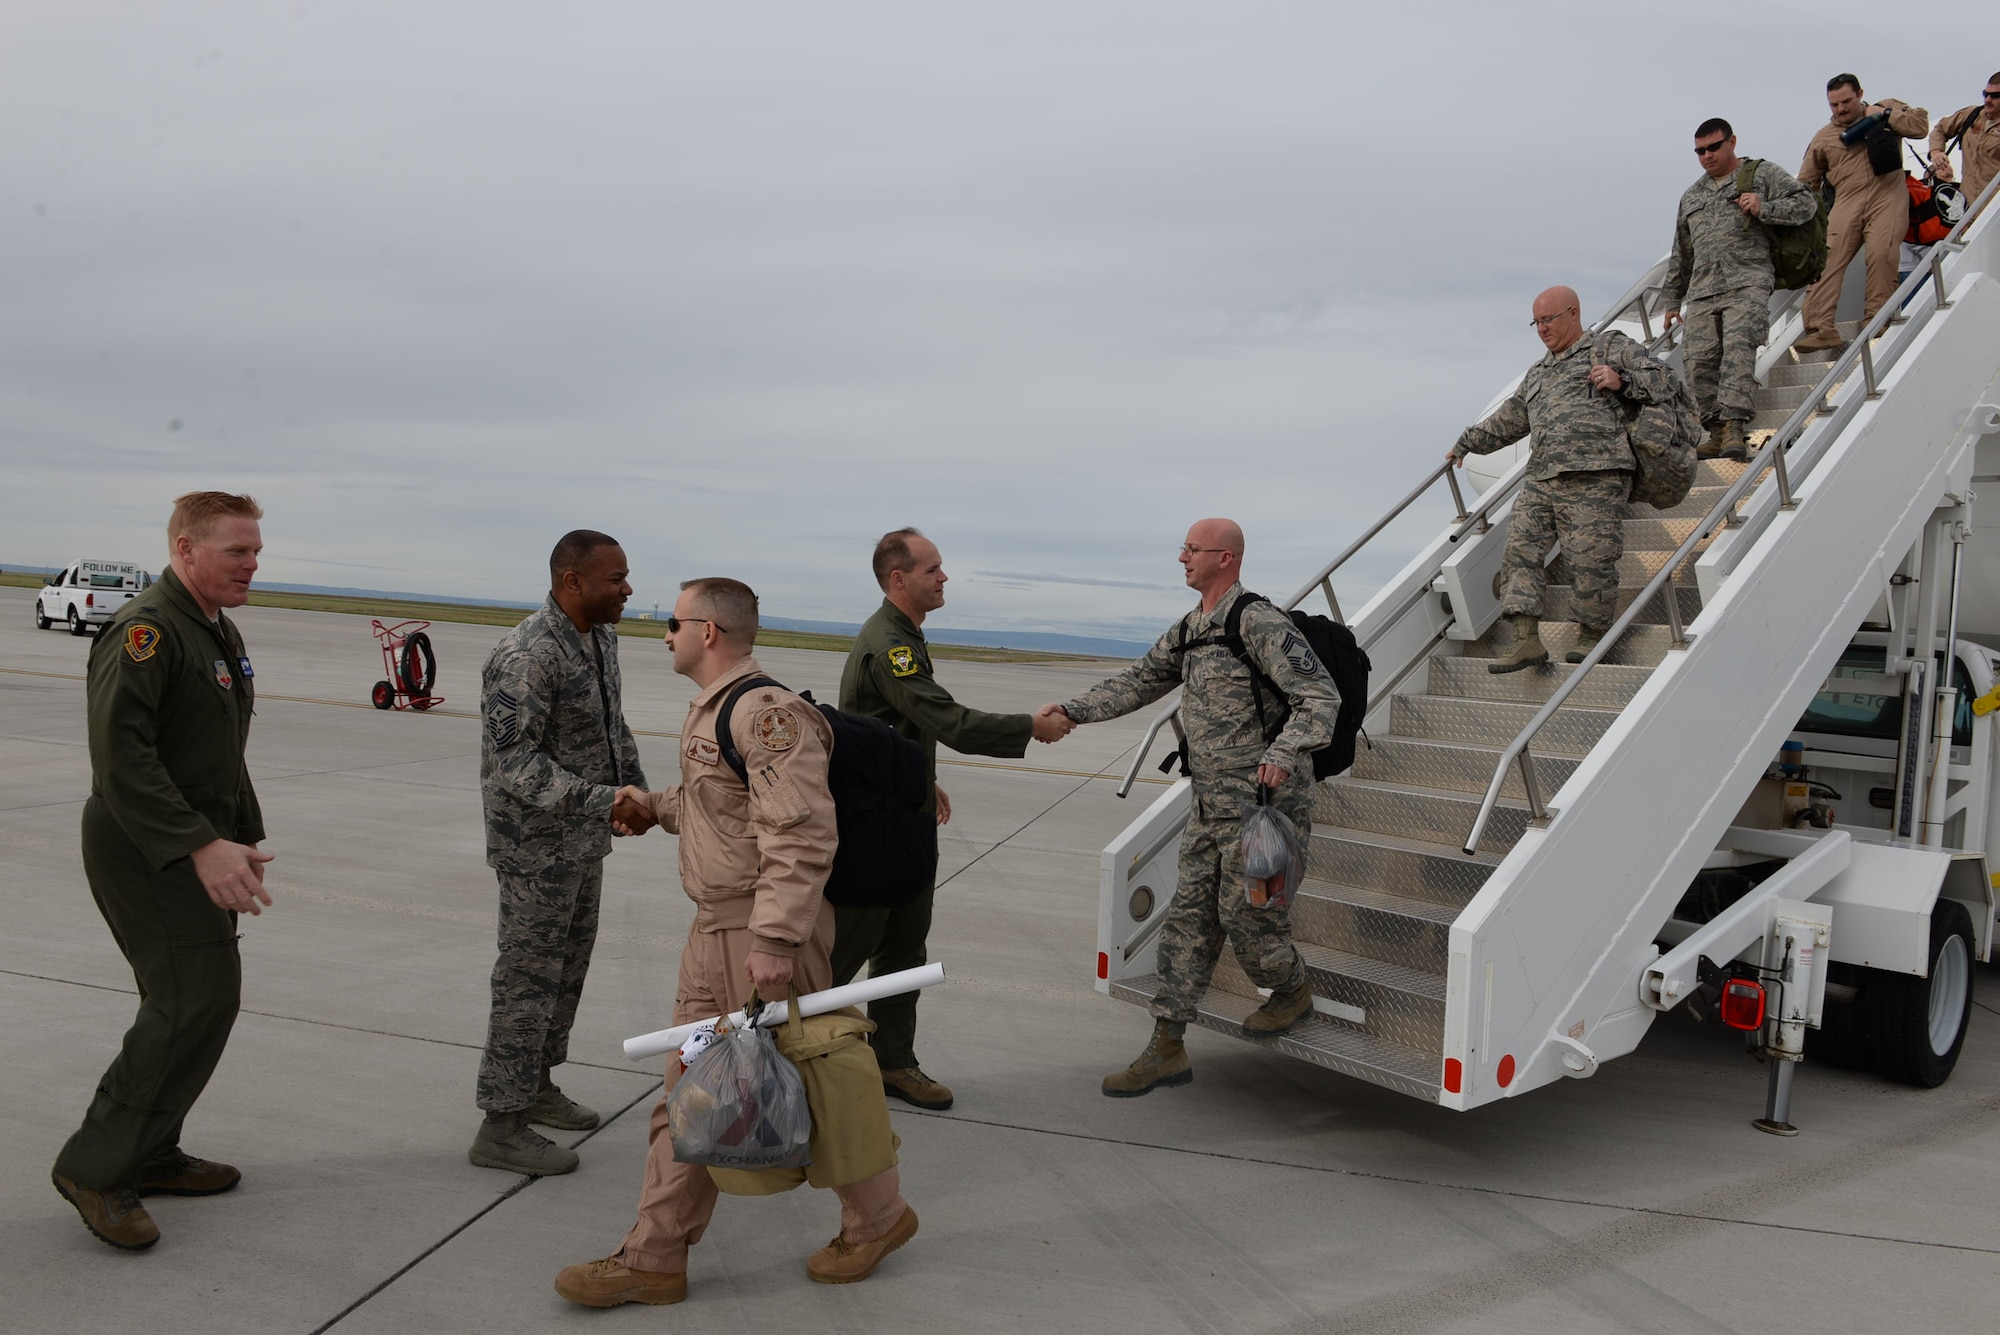 Col. Jefferson O'Donnell, 366th Fighter Wing commander, and Chief Master Sgt. David Brown, 366th Fighter Wing command chief, welcome returning airmen April 24, 2016, at Mountain Home Air Force Base, Idaho. The airmen were deployed in support of Operation Inherent Resolve. (U.S. Air Force photo by Airman 1st Class Chester Mientkiewicz/Released)